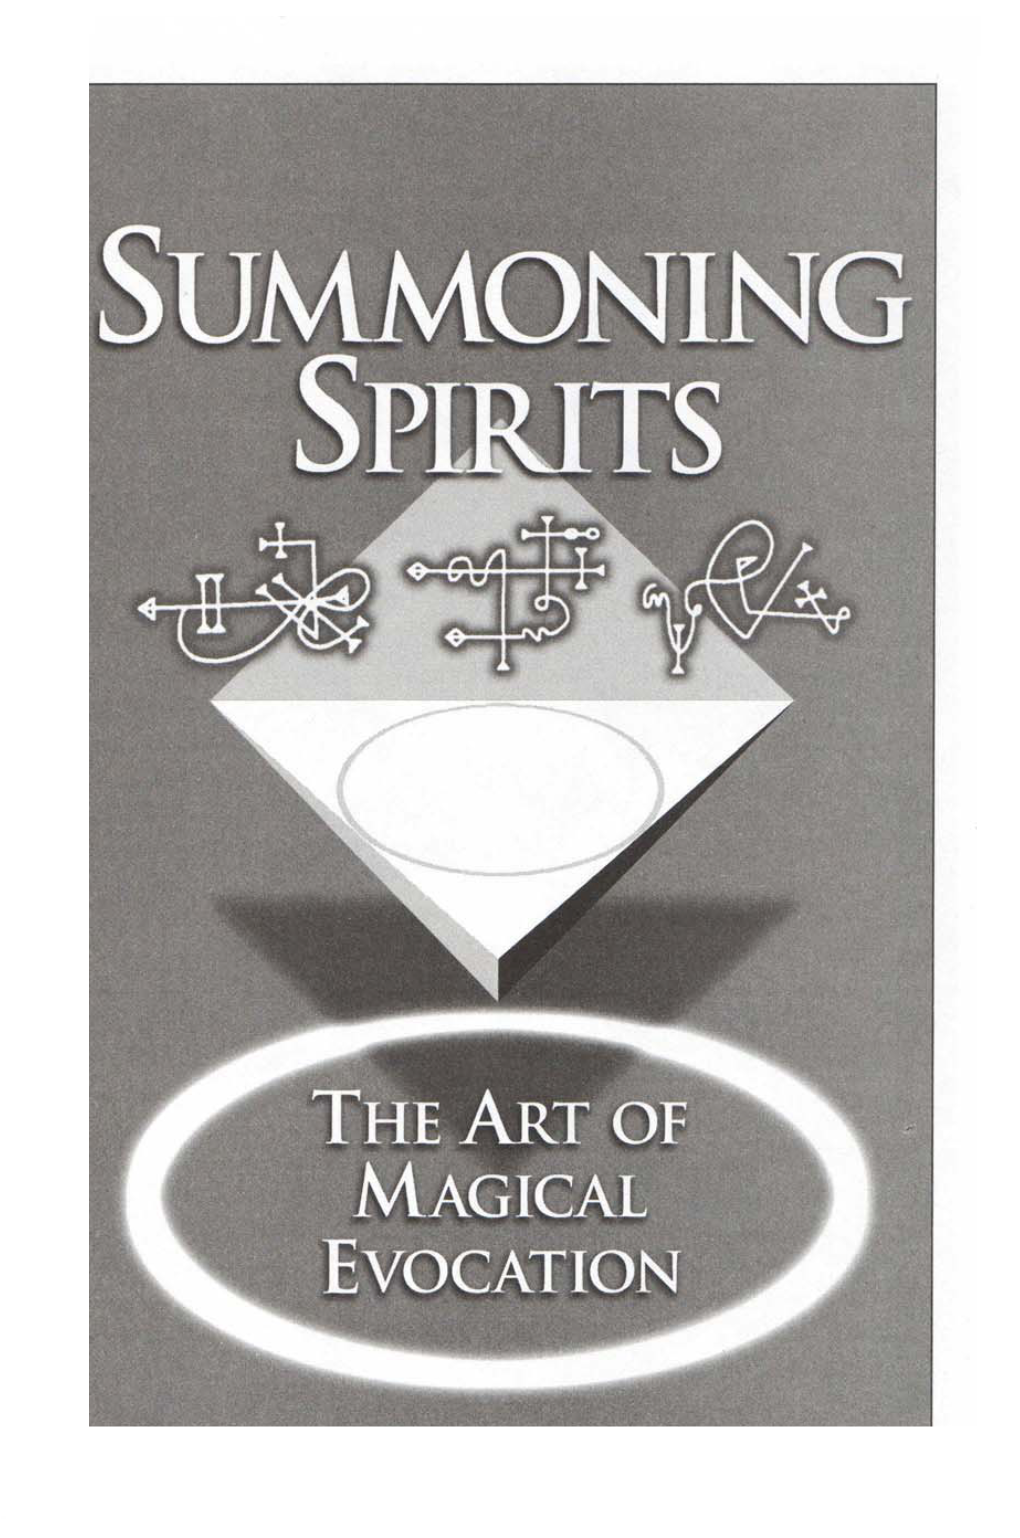 SUMMONING SPIRITS Now That We Have a Working Definition of What Magical Evocation Is, We Should Be Able to Illustrate What It Is Not Rather Simply